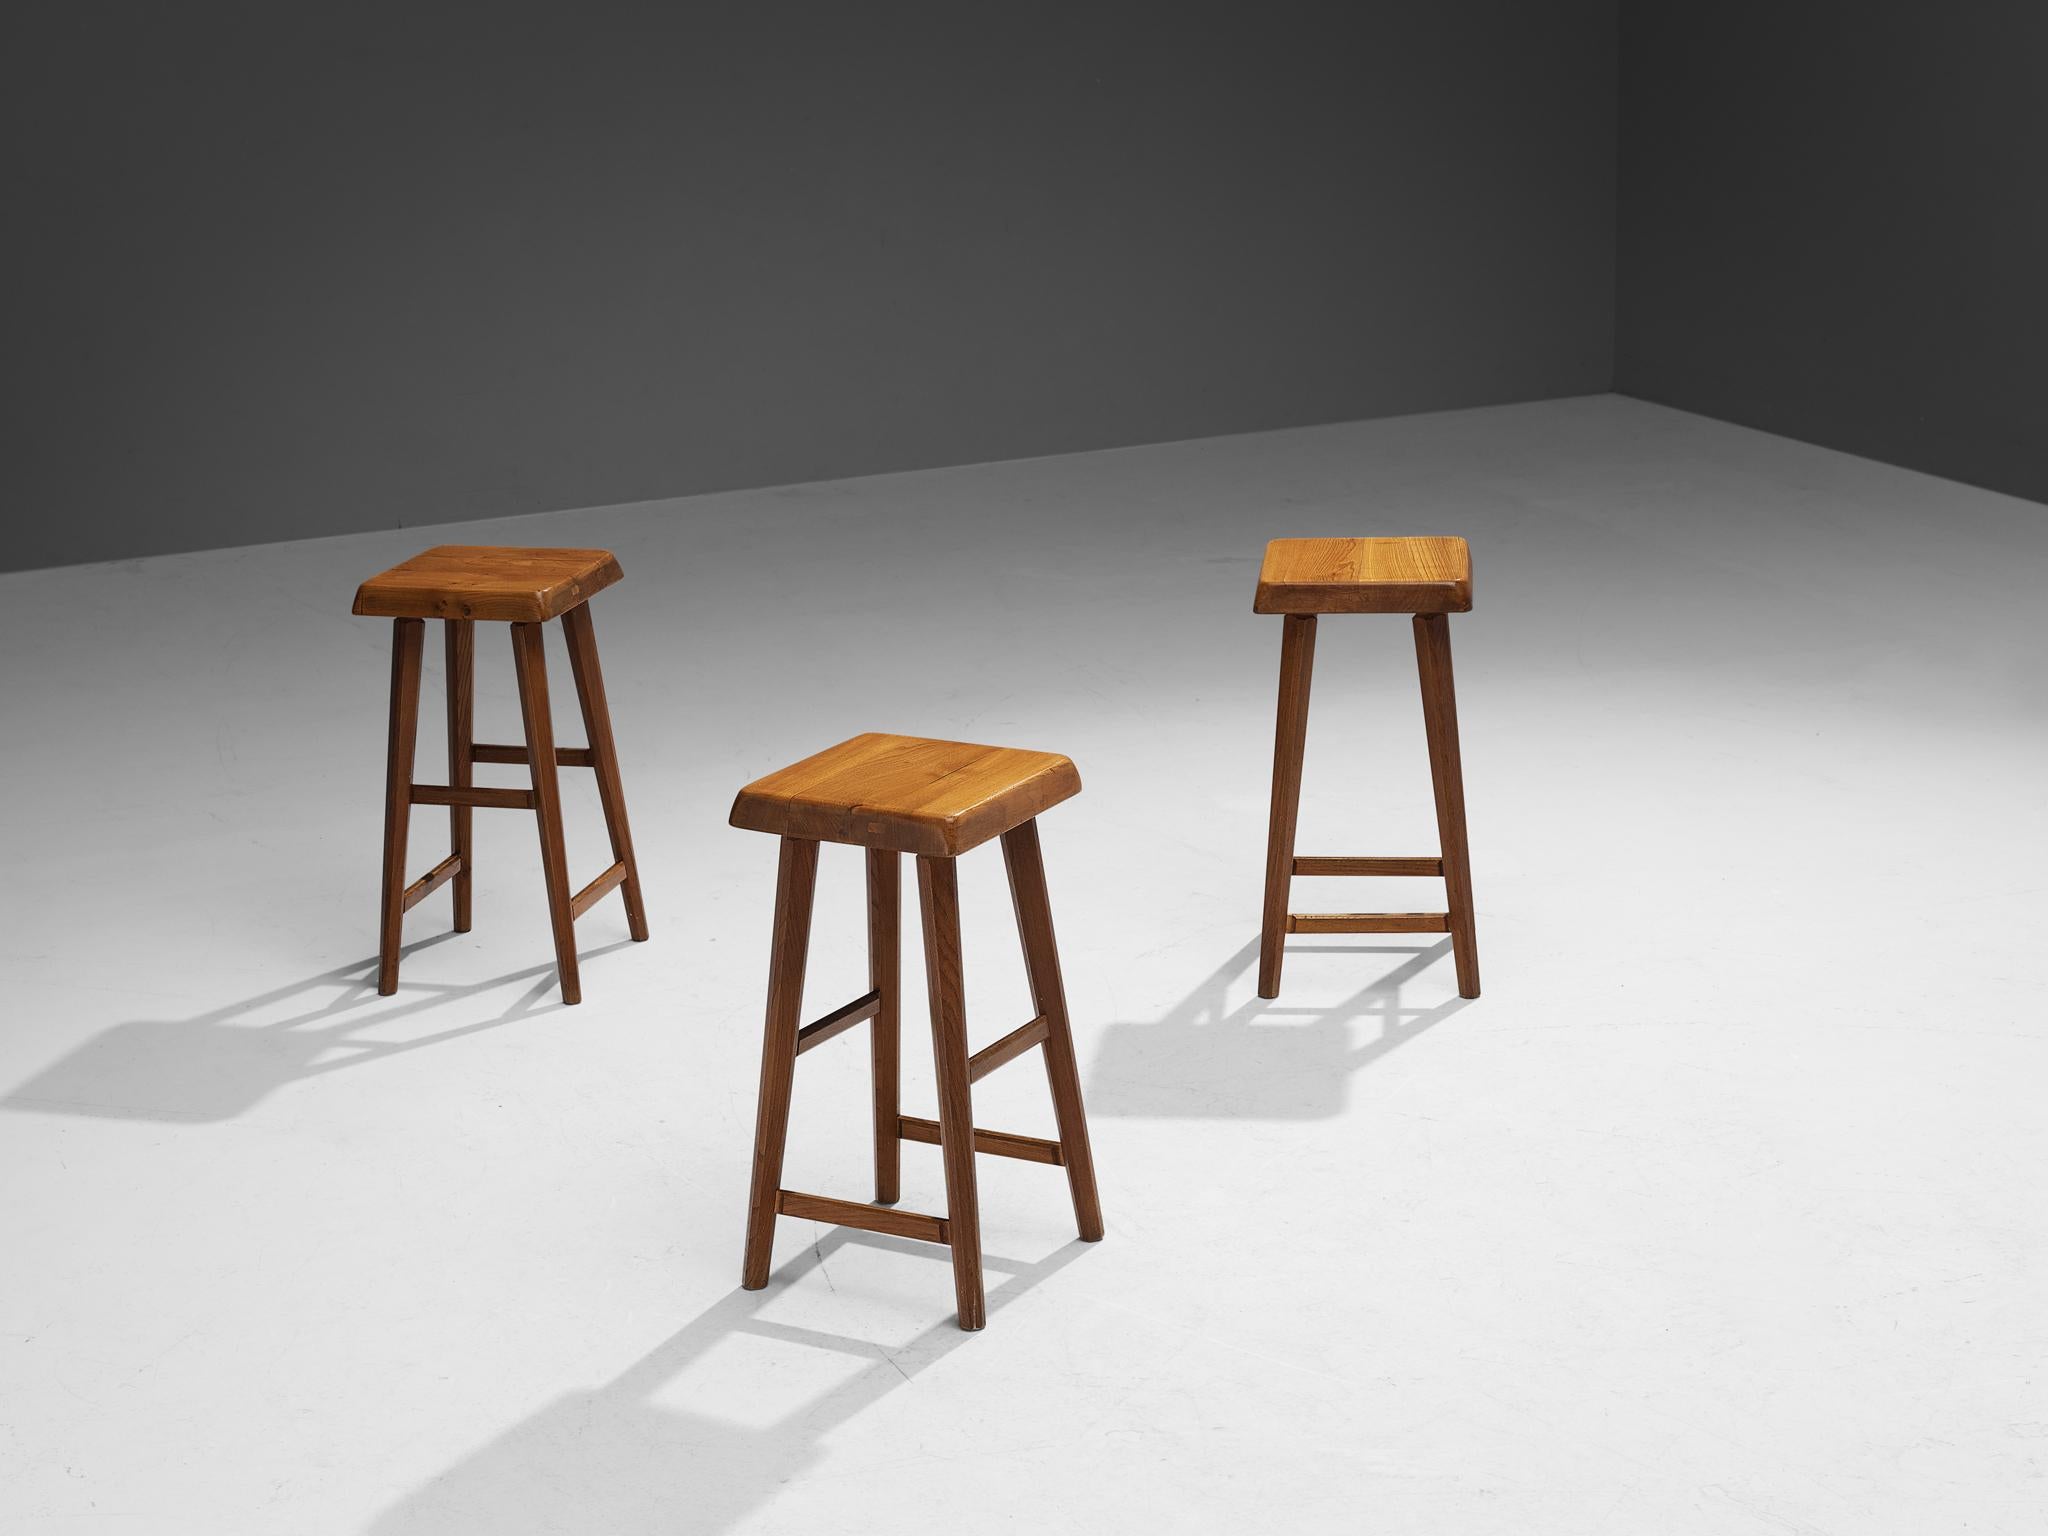 Pierre Chapo, set of three stools model S01R, elm, France, design 1962

This set of modernized farm stools have a robust and rustic character and showcases the characteristics of Pierre Chapo. First of all the material is typical for Chapo who